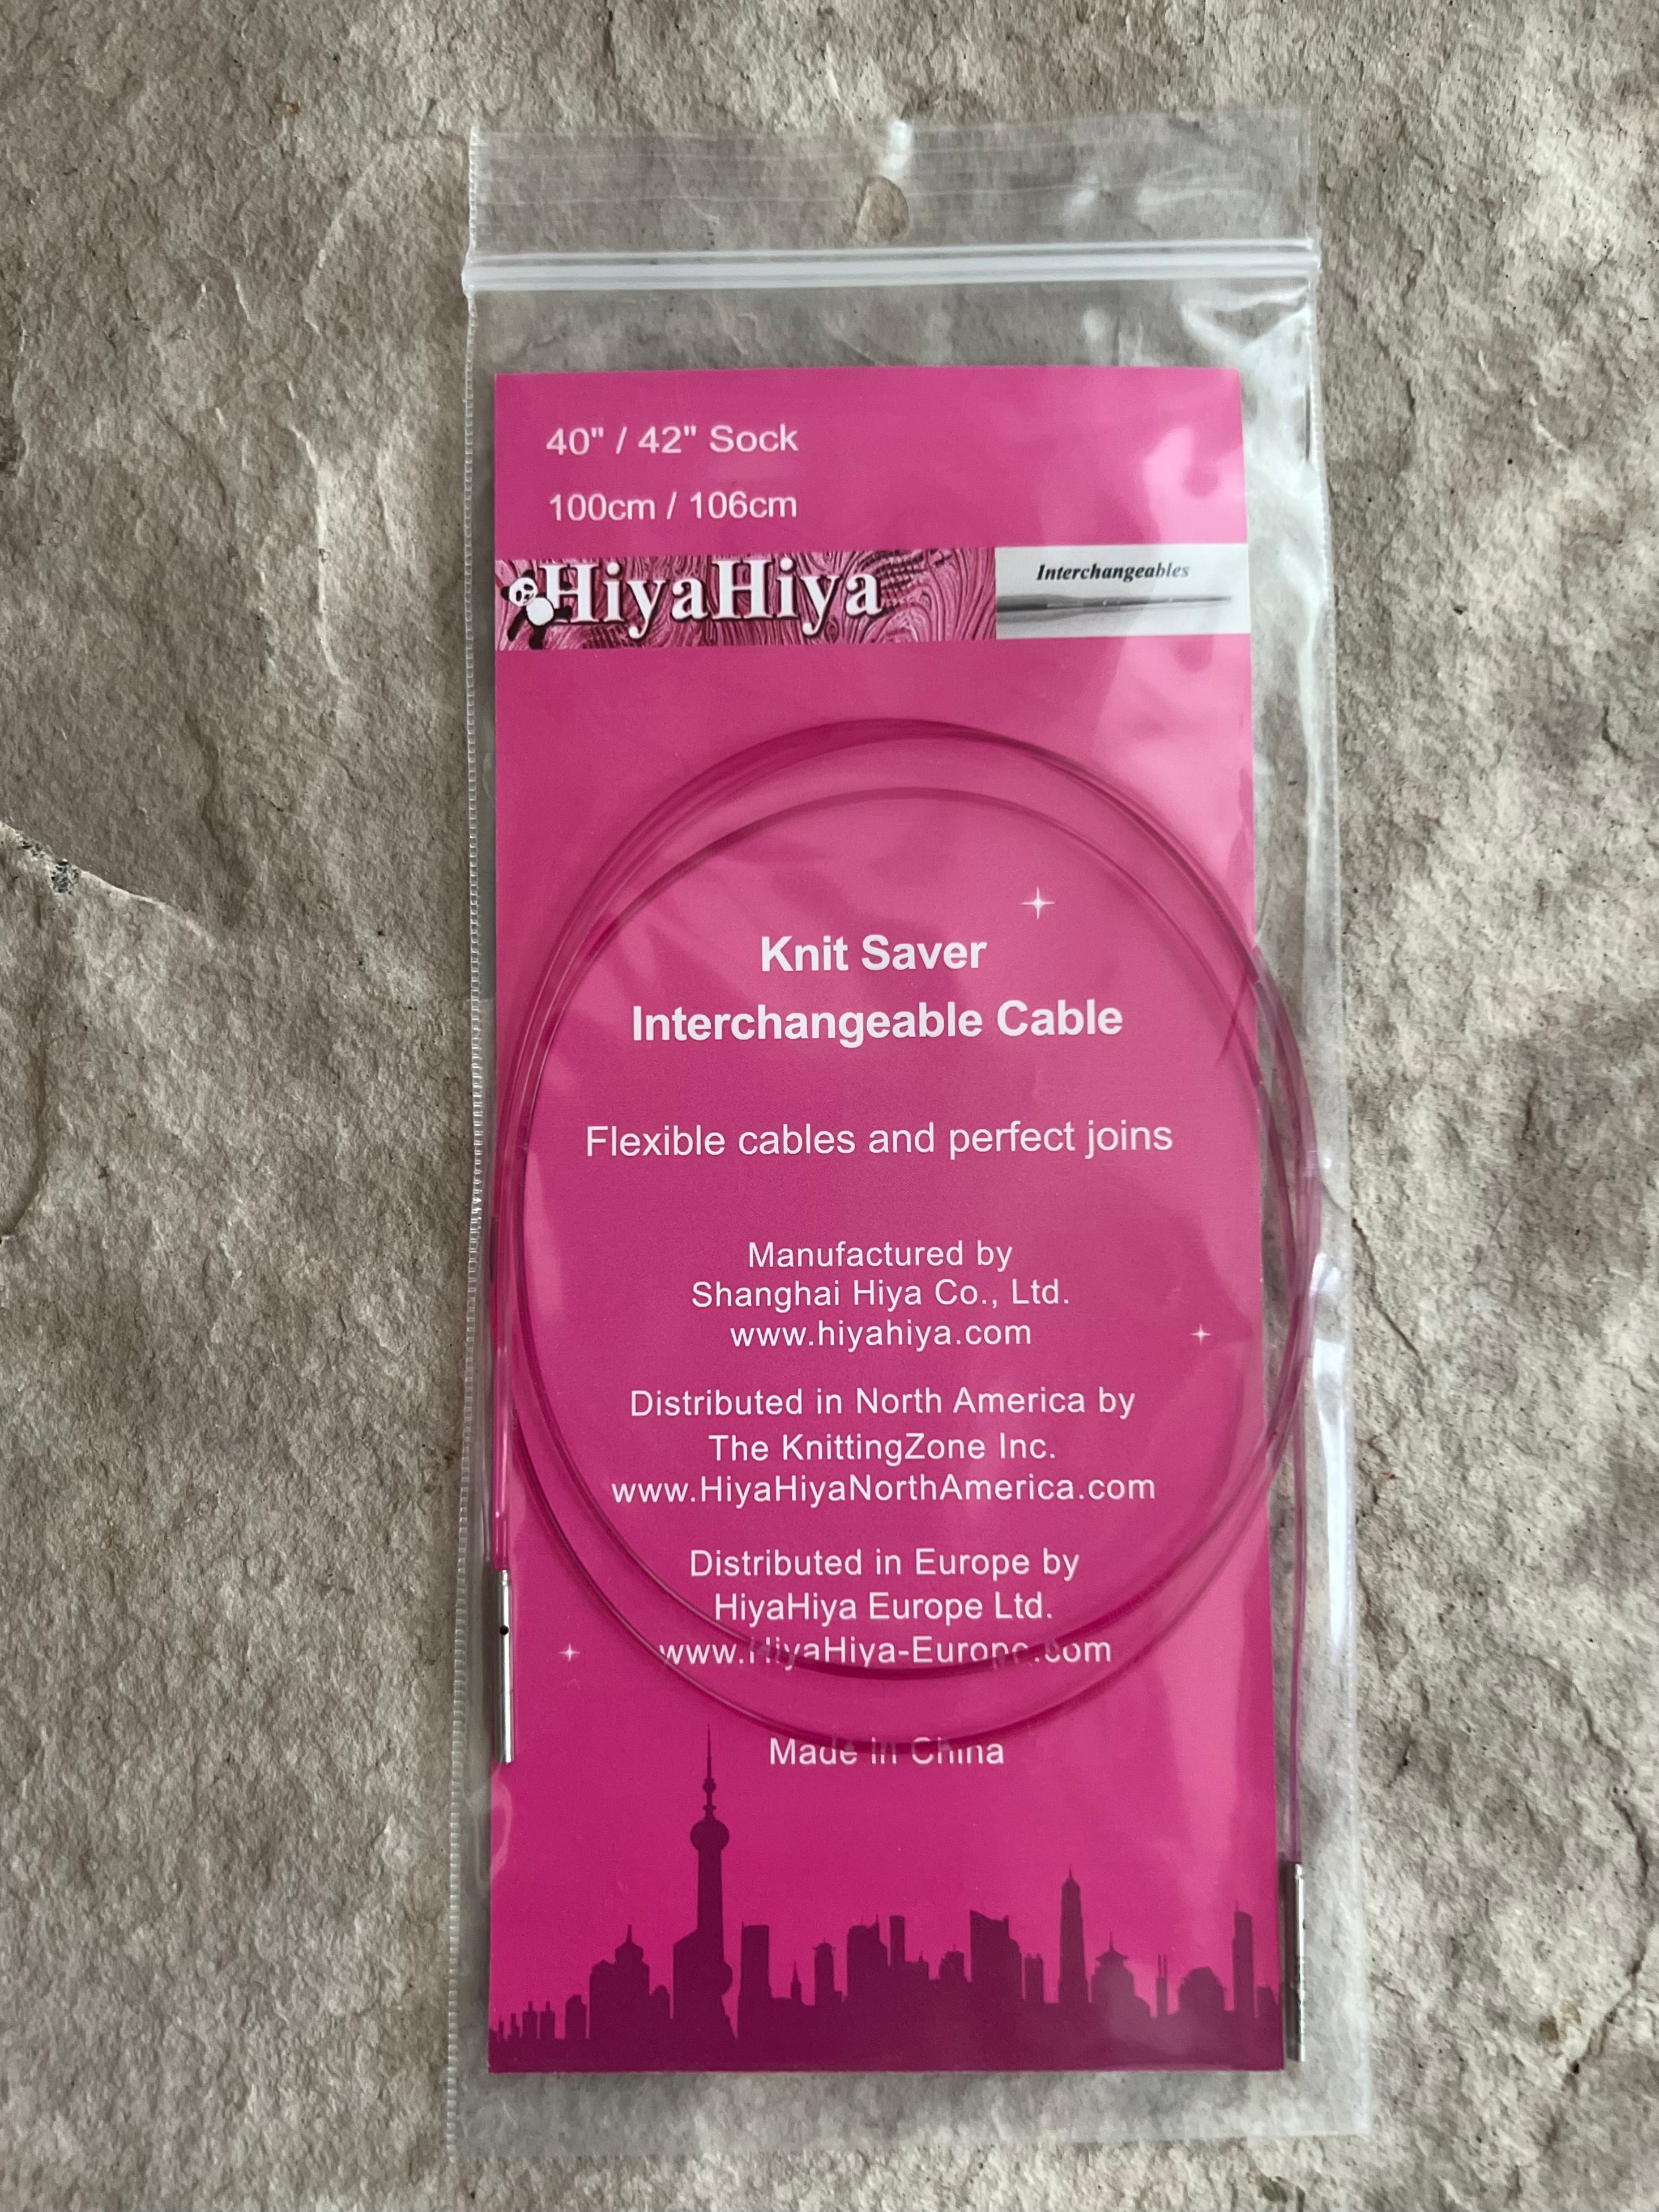 HiyaHiya Interchangeable Cables for Large Sizes – Must Love Yarn